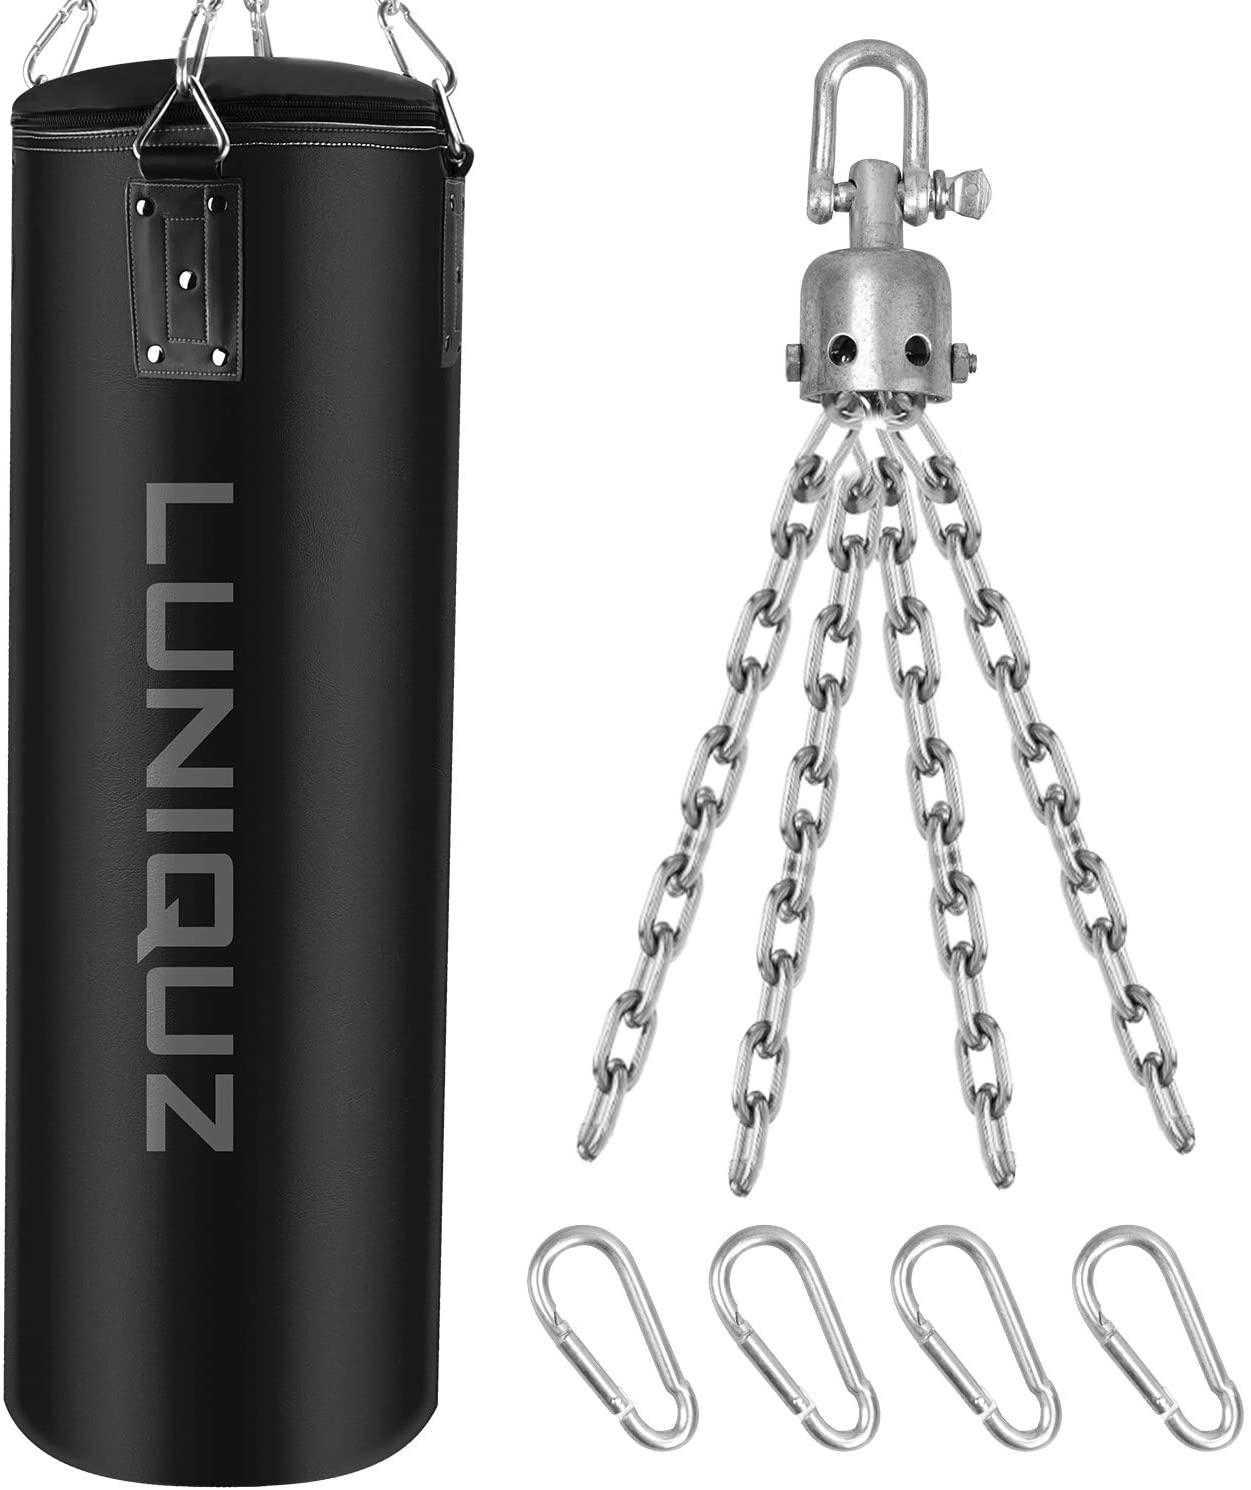 Luniquz Hanging Punching Bag Unfilled Leather Heavy Boxing Bag with Swivel Mount Set for Adults Youth 